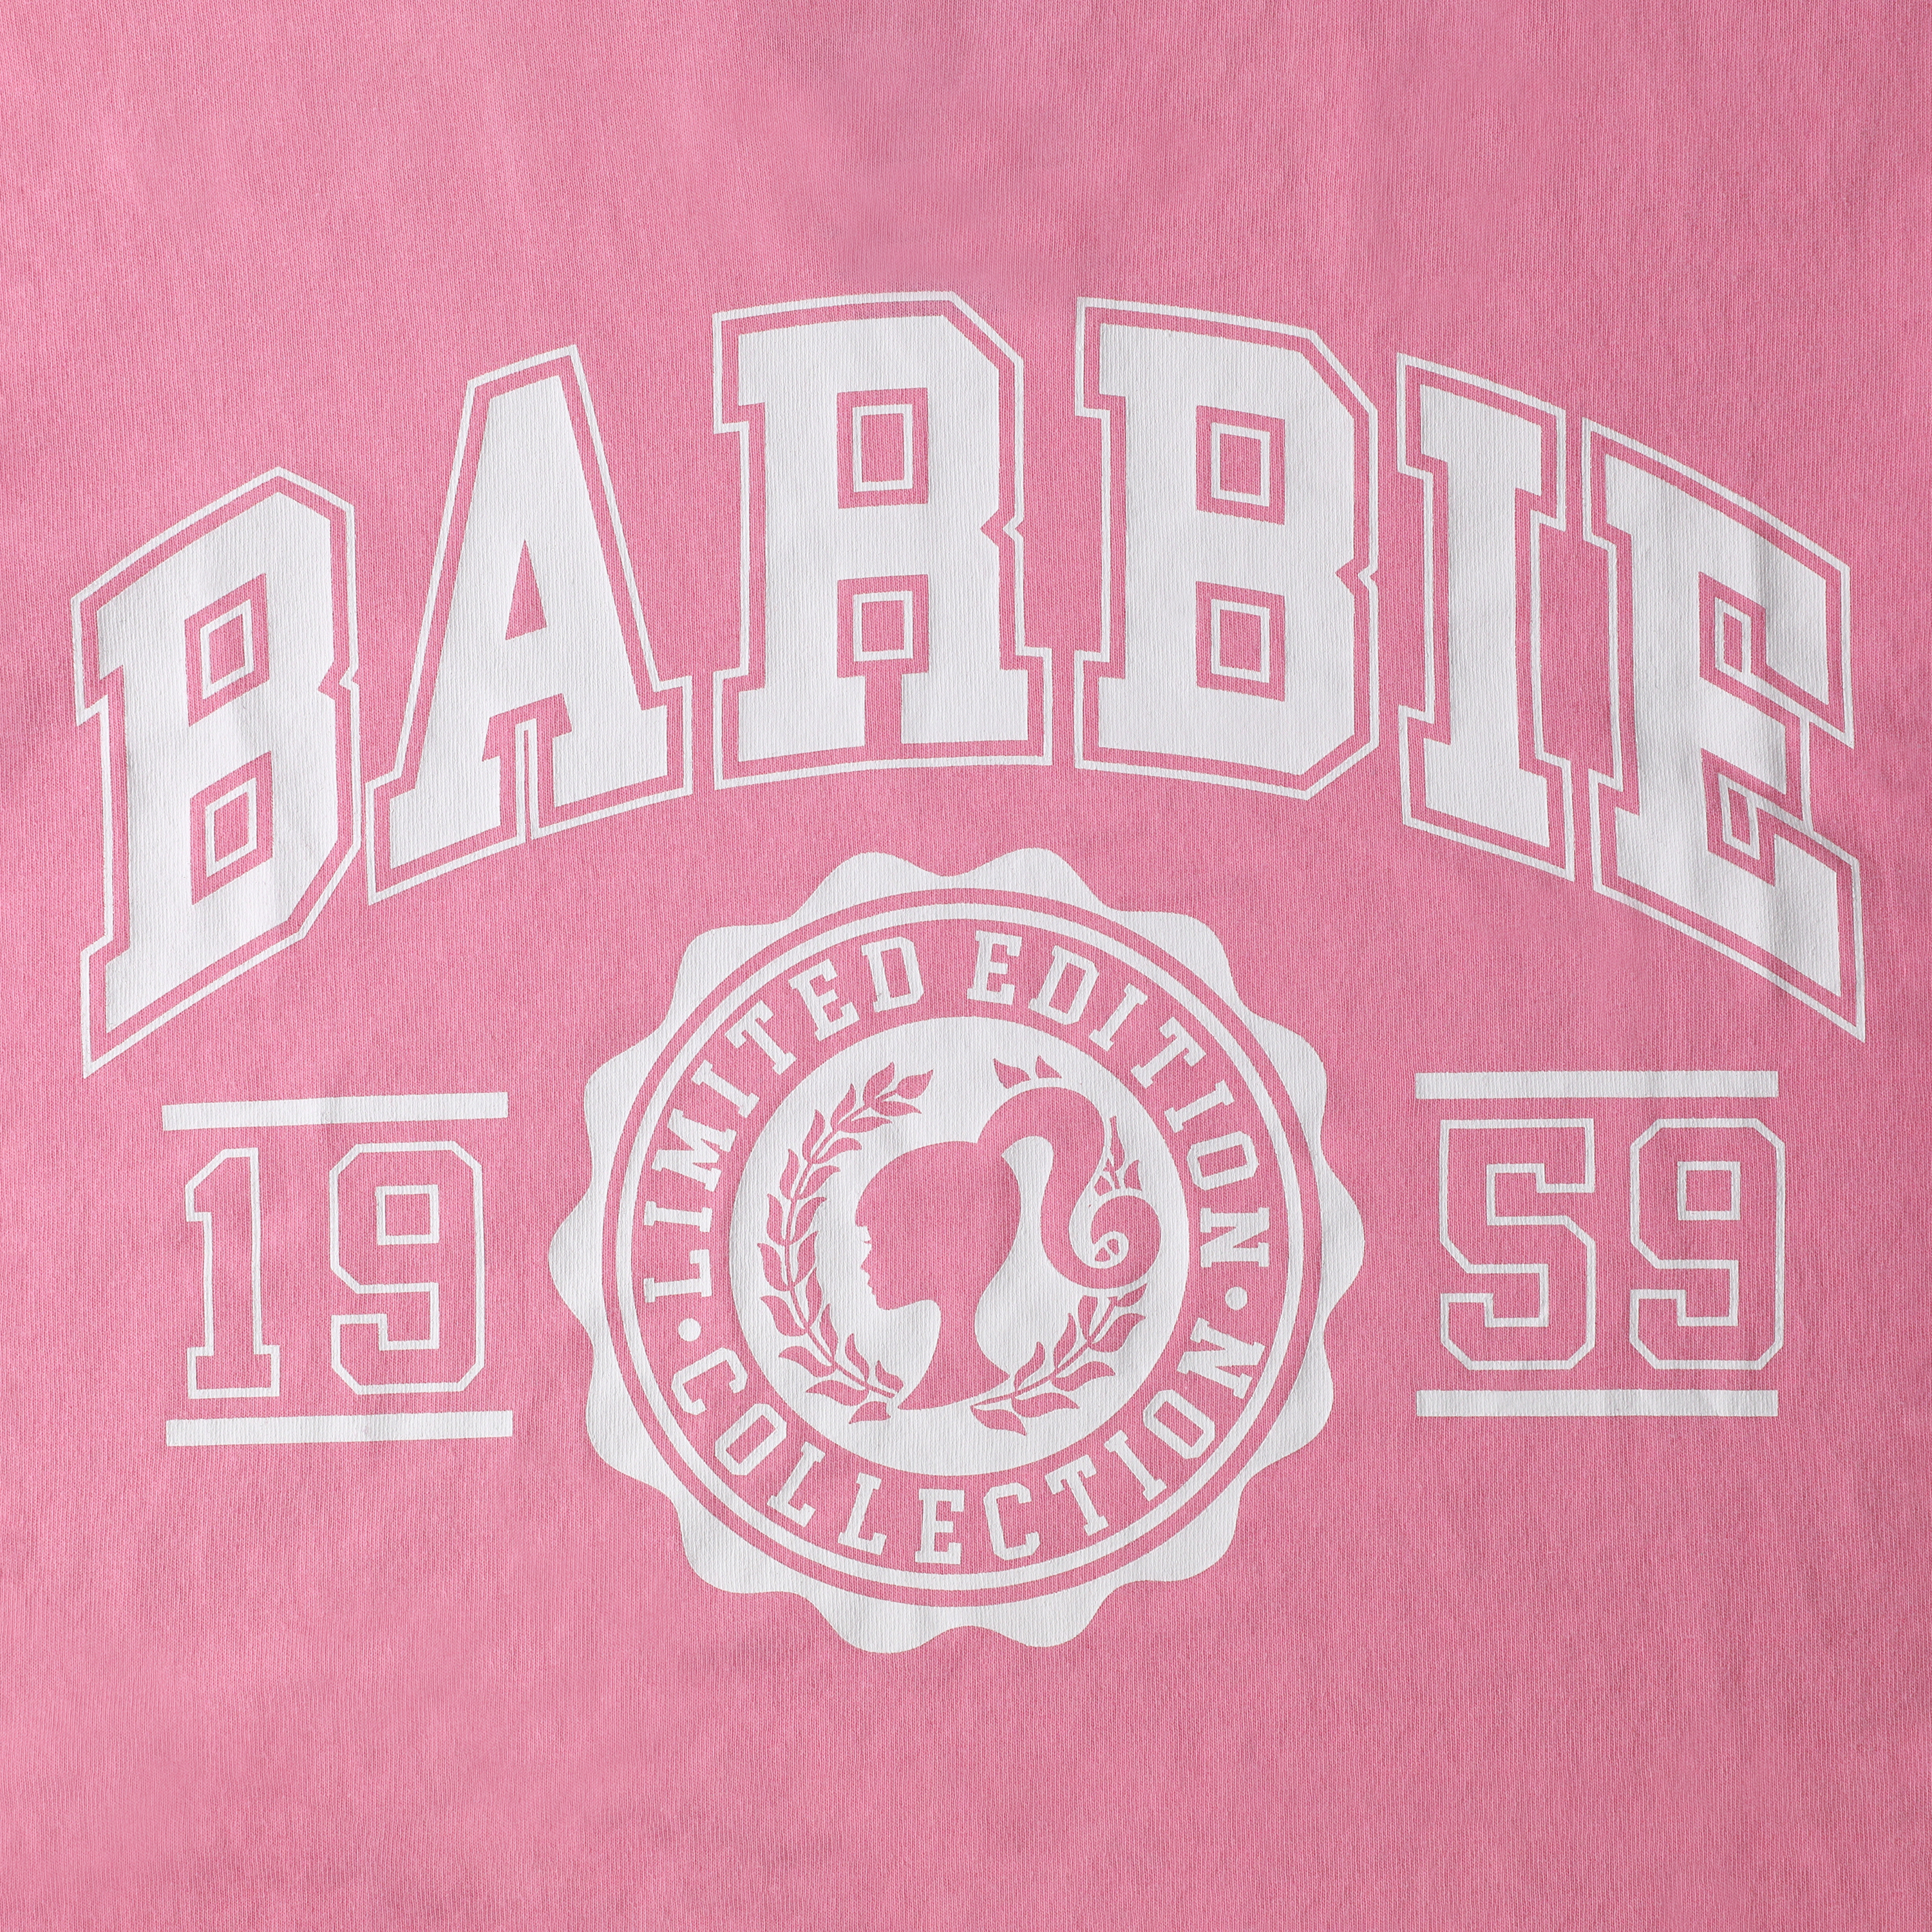 Barbie 1959 Limited Edition Graphic Tee